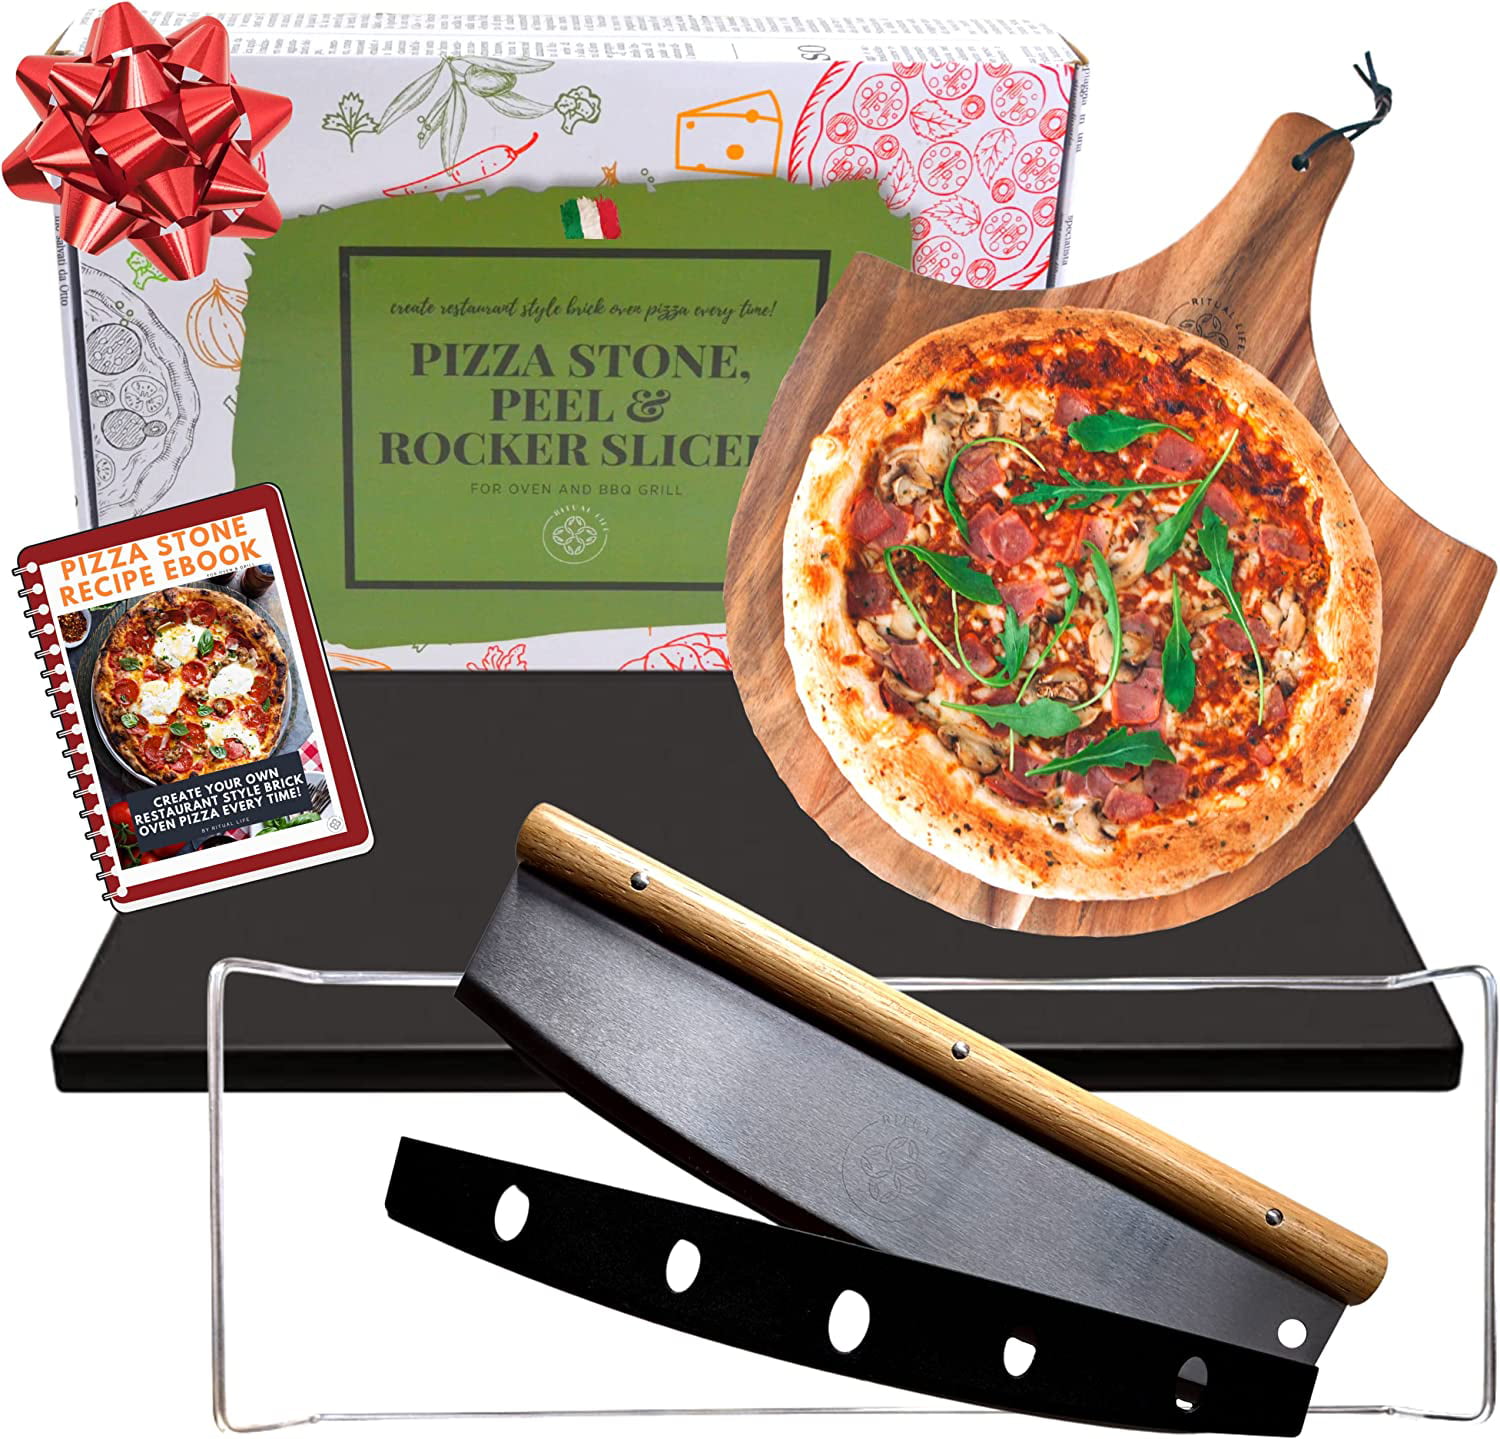 huid Kolibrie namens Black Pizza Stone for Oven and Grill with Wood Pizza Peel & Pizza Cutter -  Cordierite Baking Stone Ceramic Coated Stainless and Non-stick - Detachable  Serving Handles - 15 inch x 12